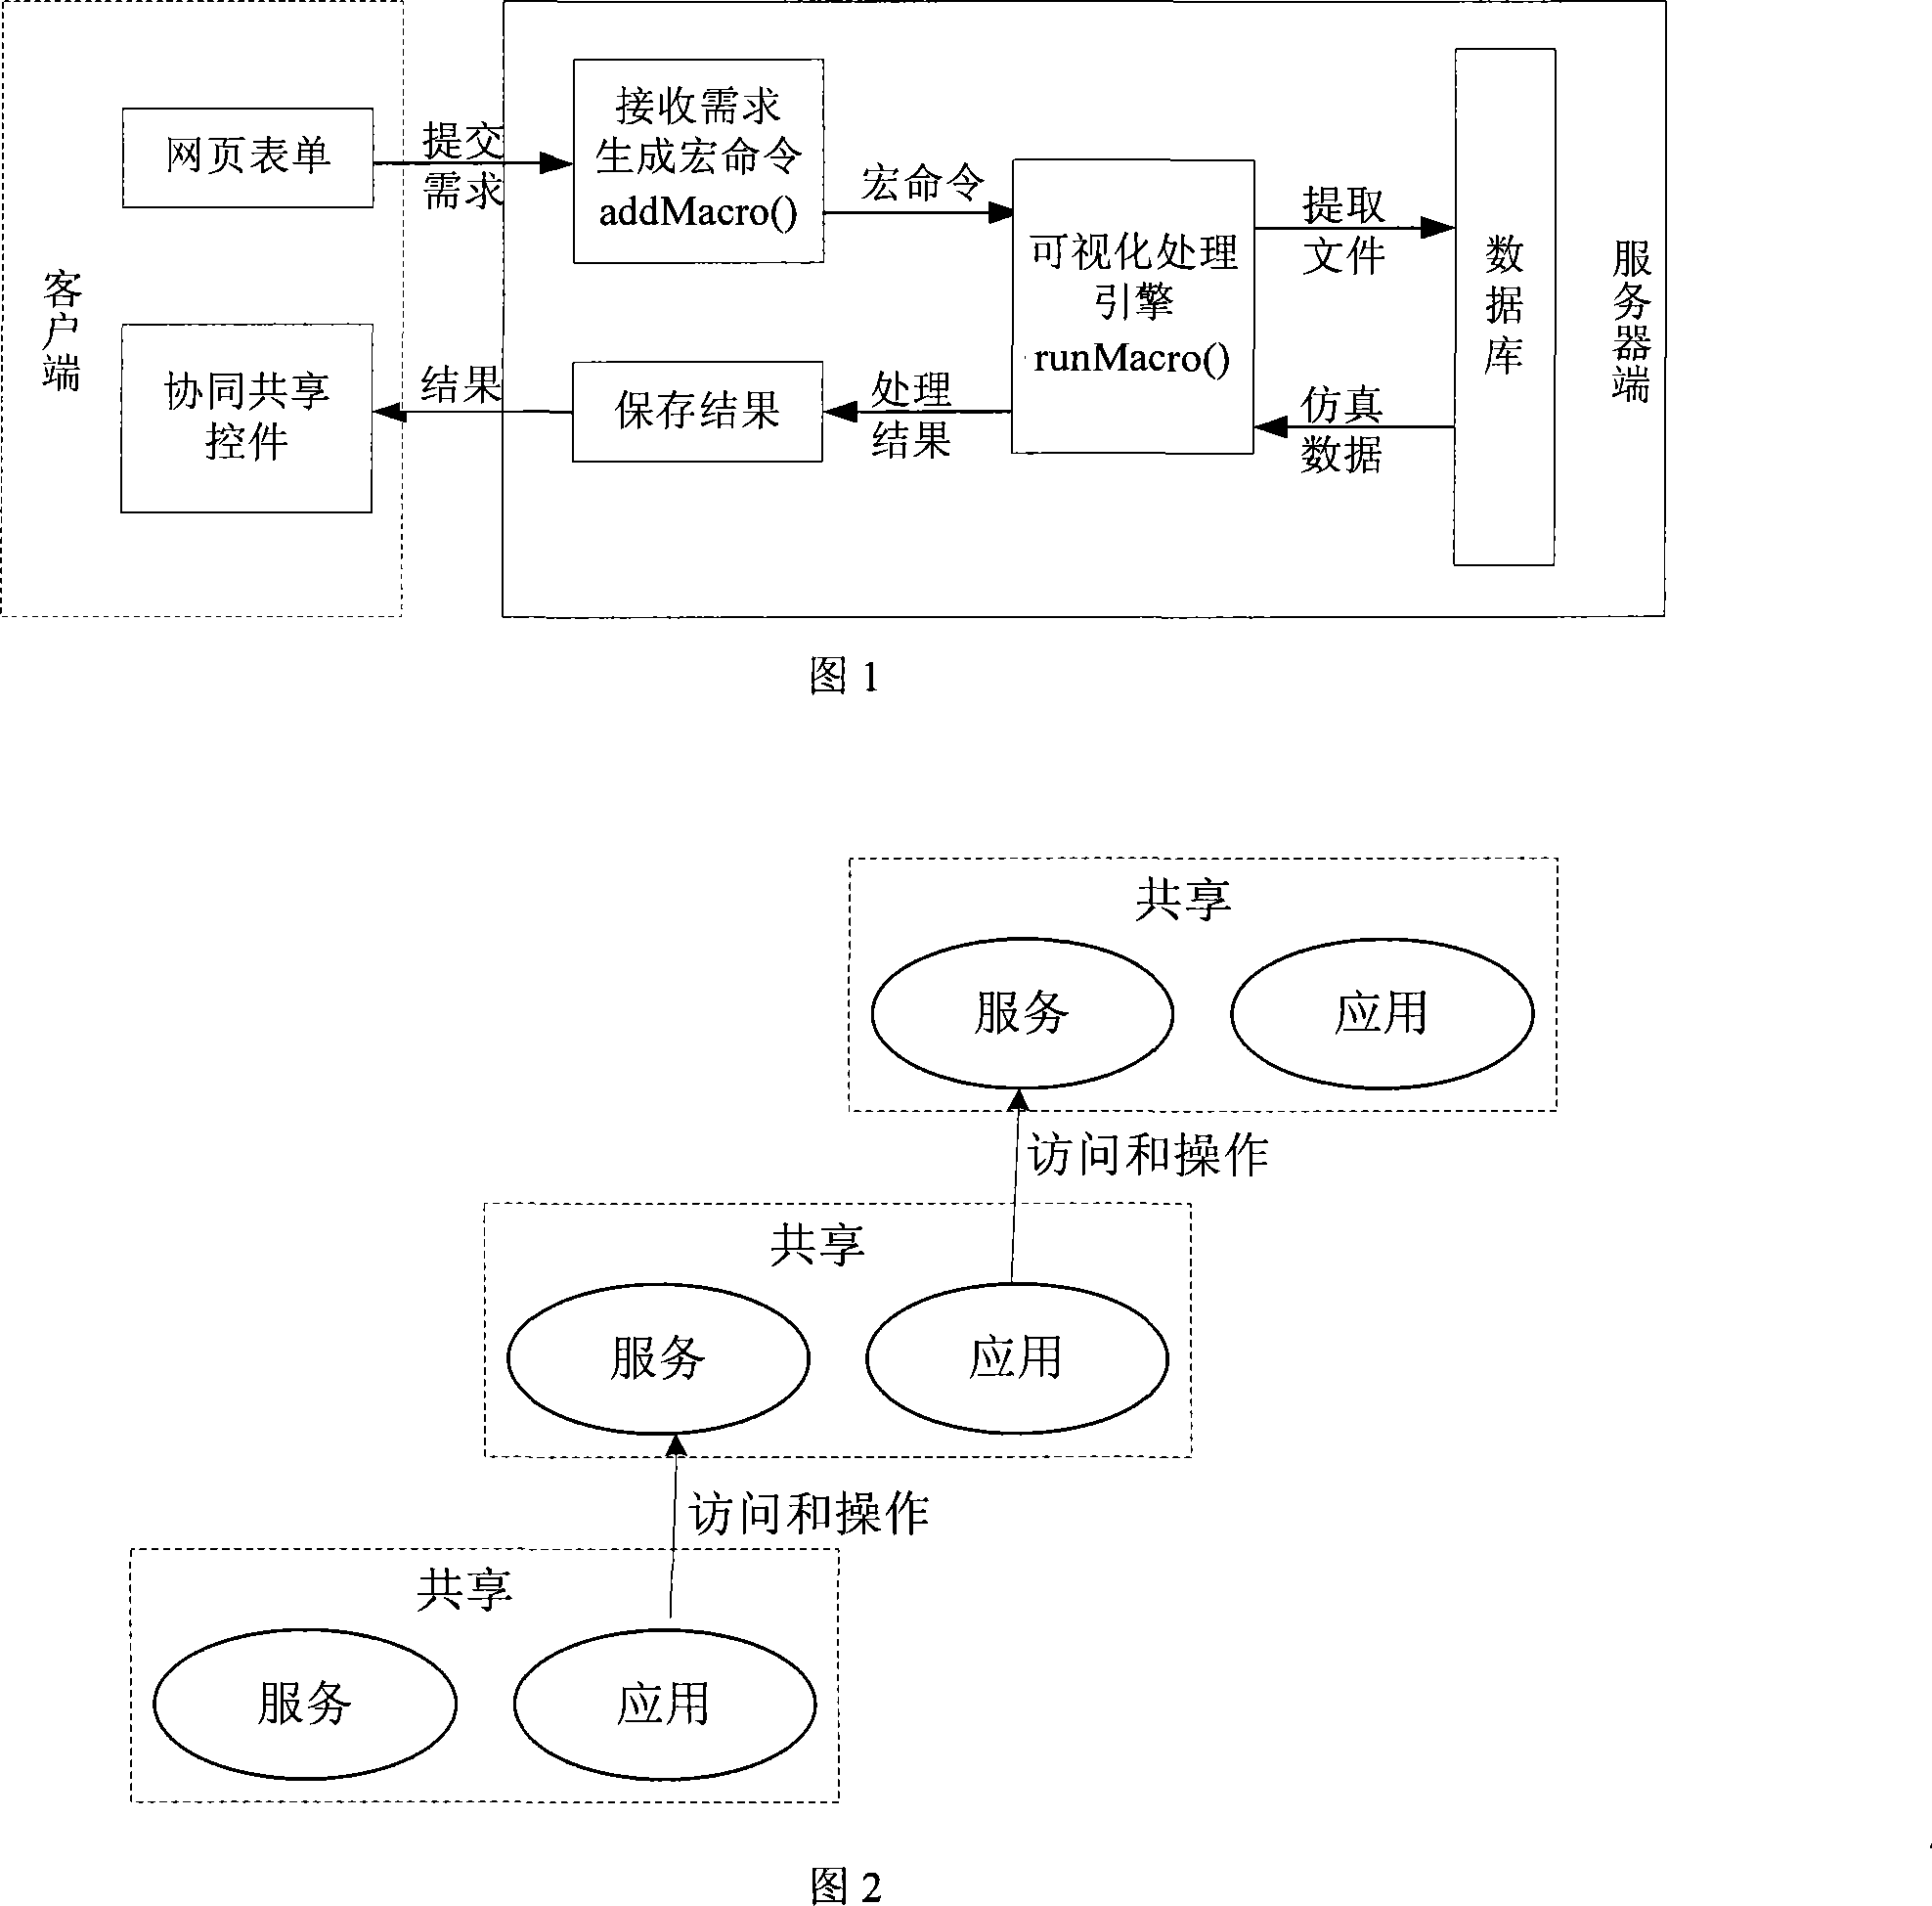 Emulated data visualized and cooperated sharing method